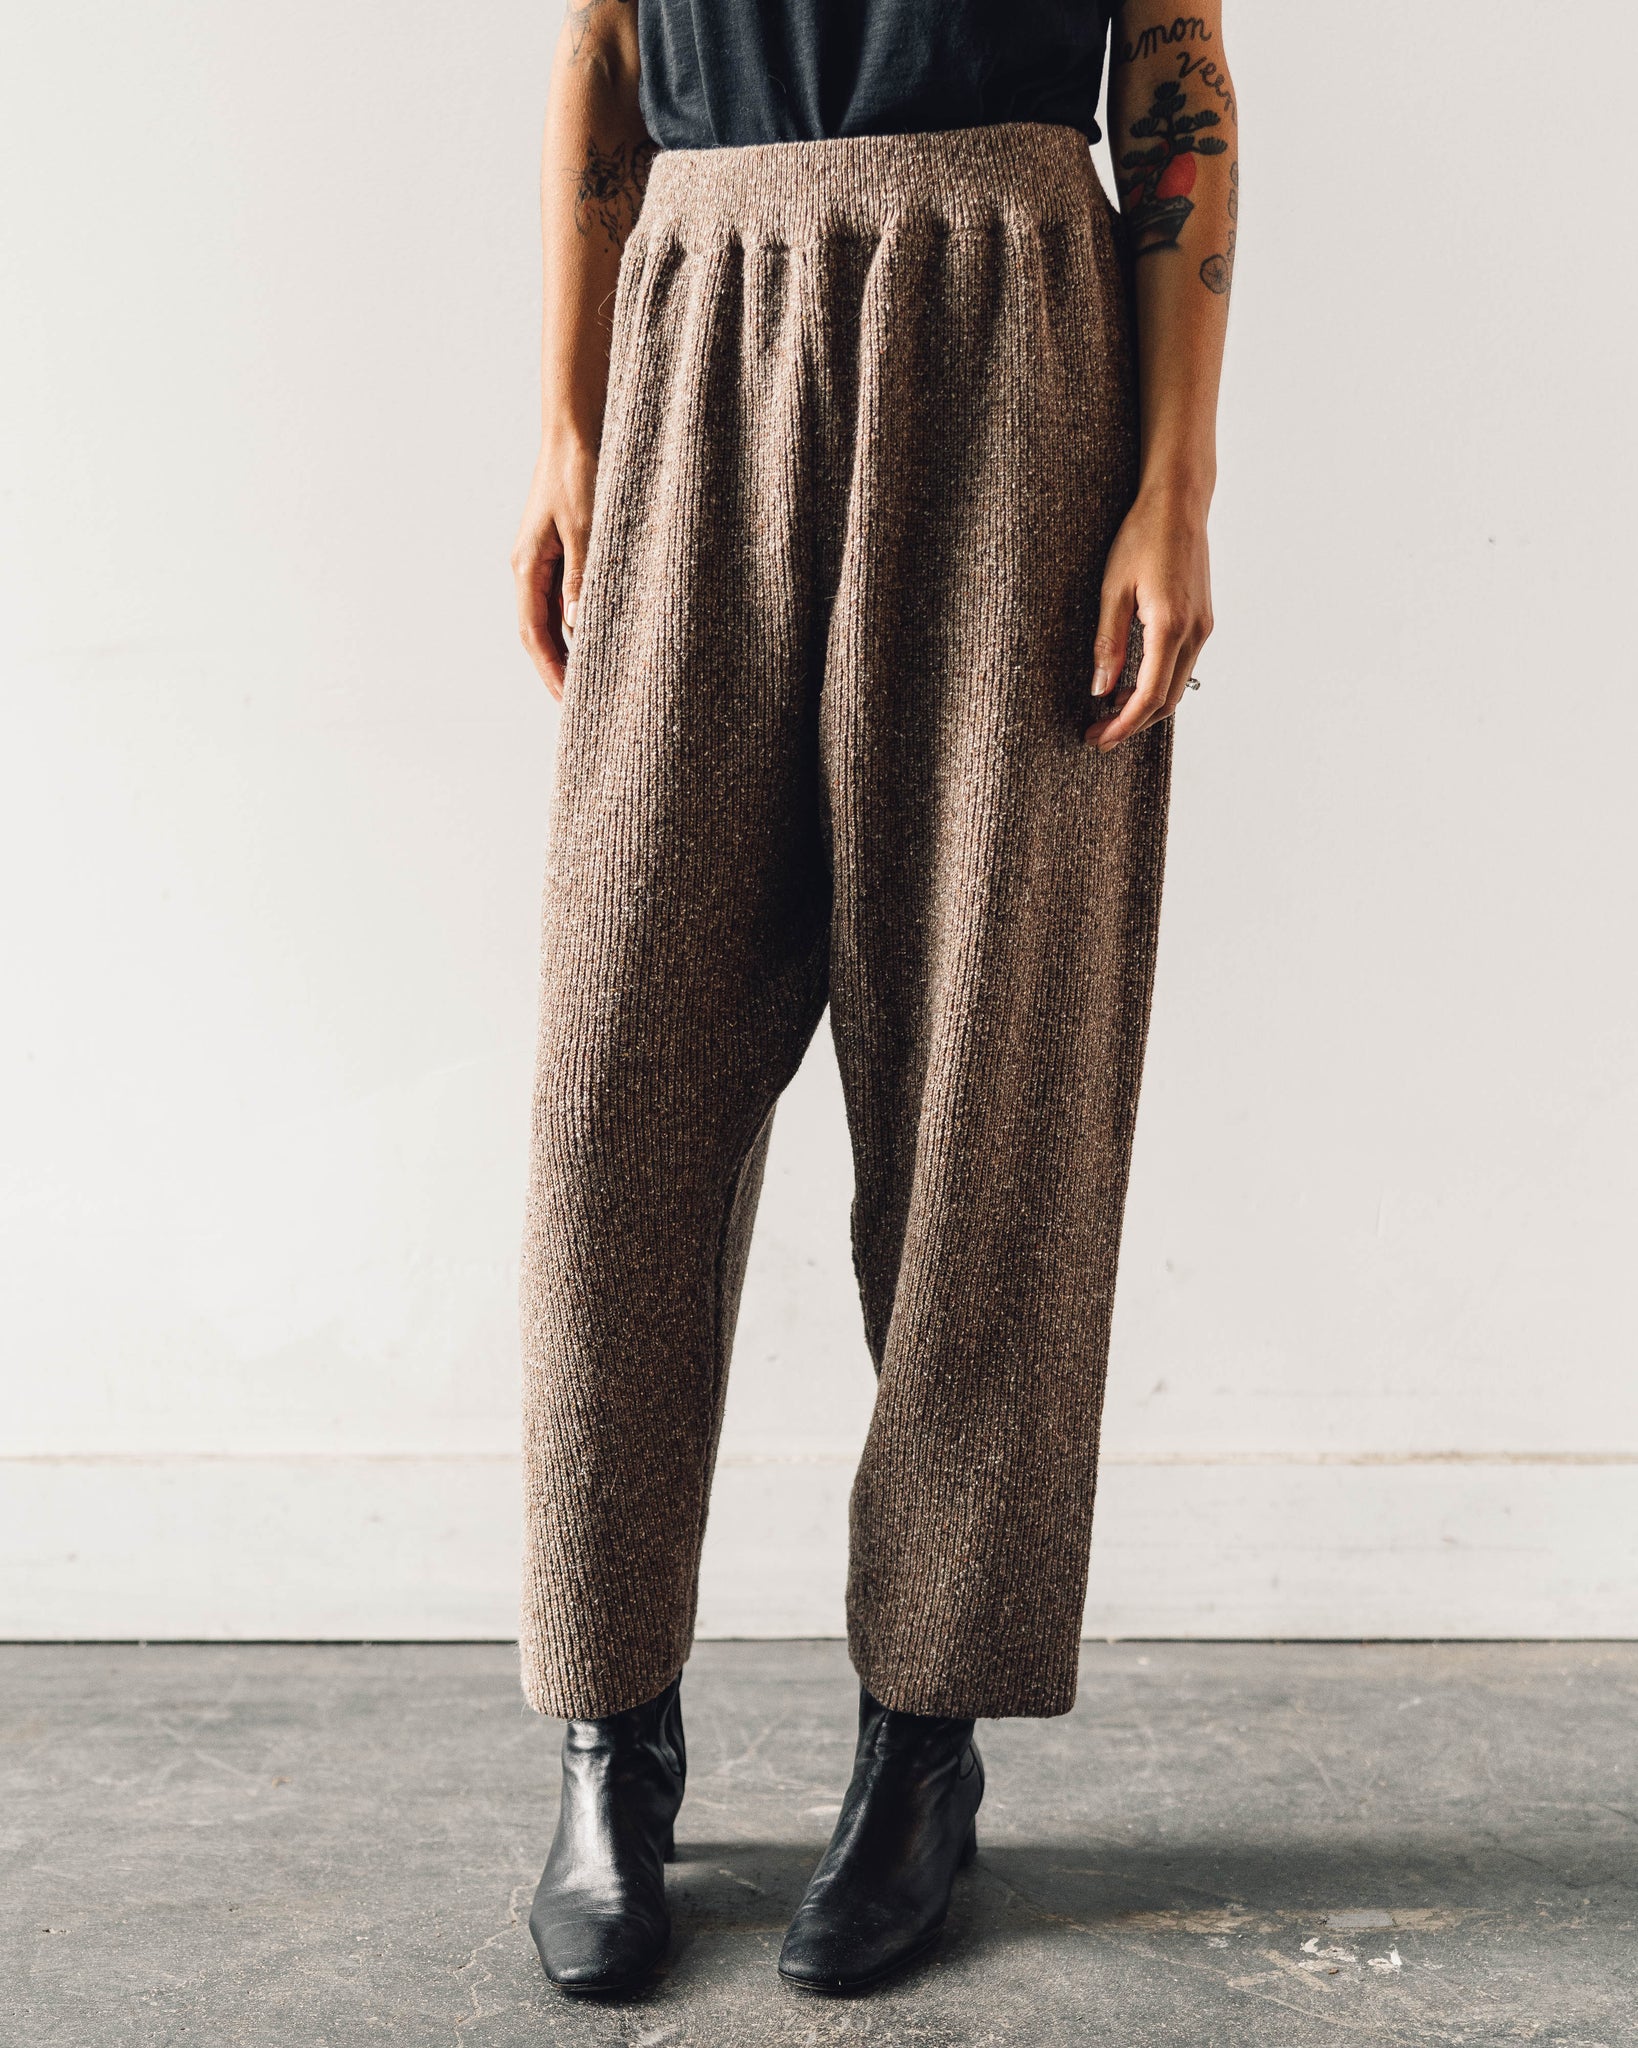 Wool Pants Recommendation - 24hourcampfire